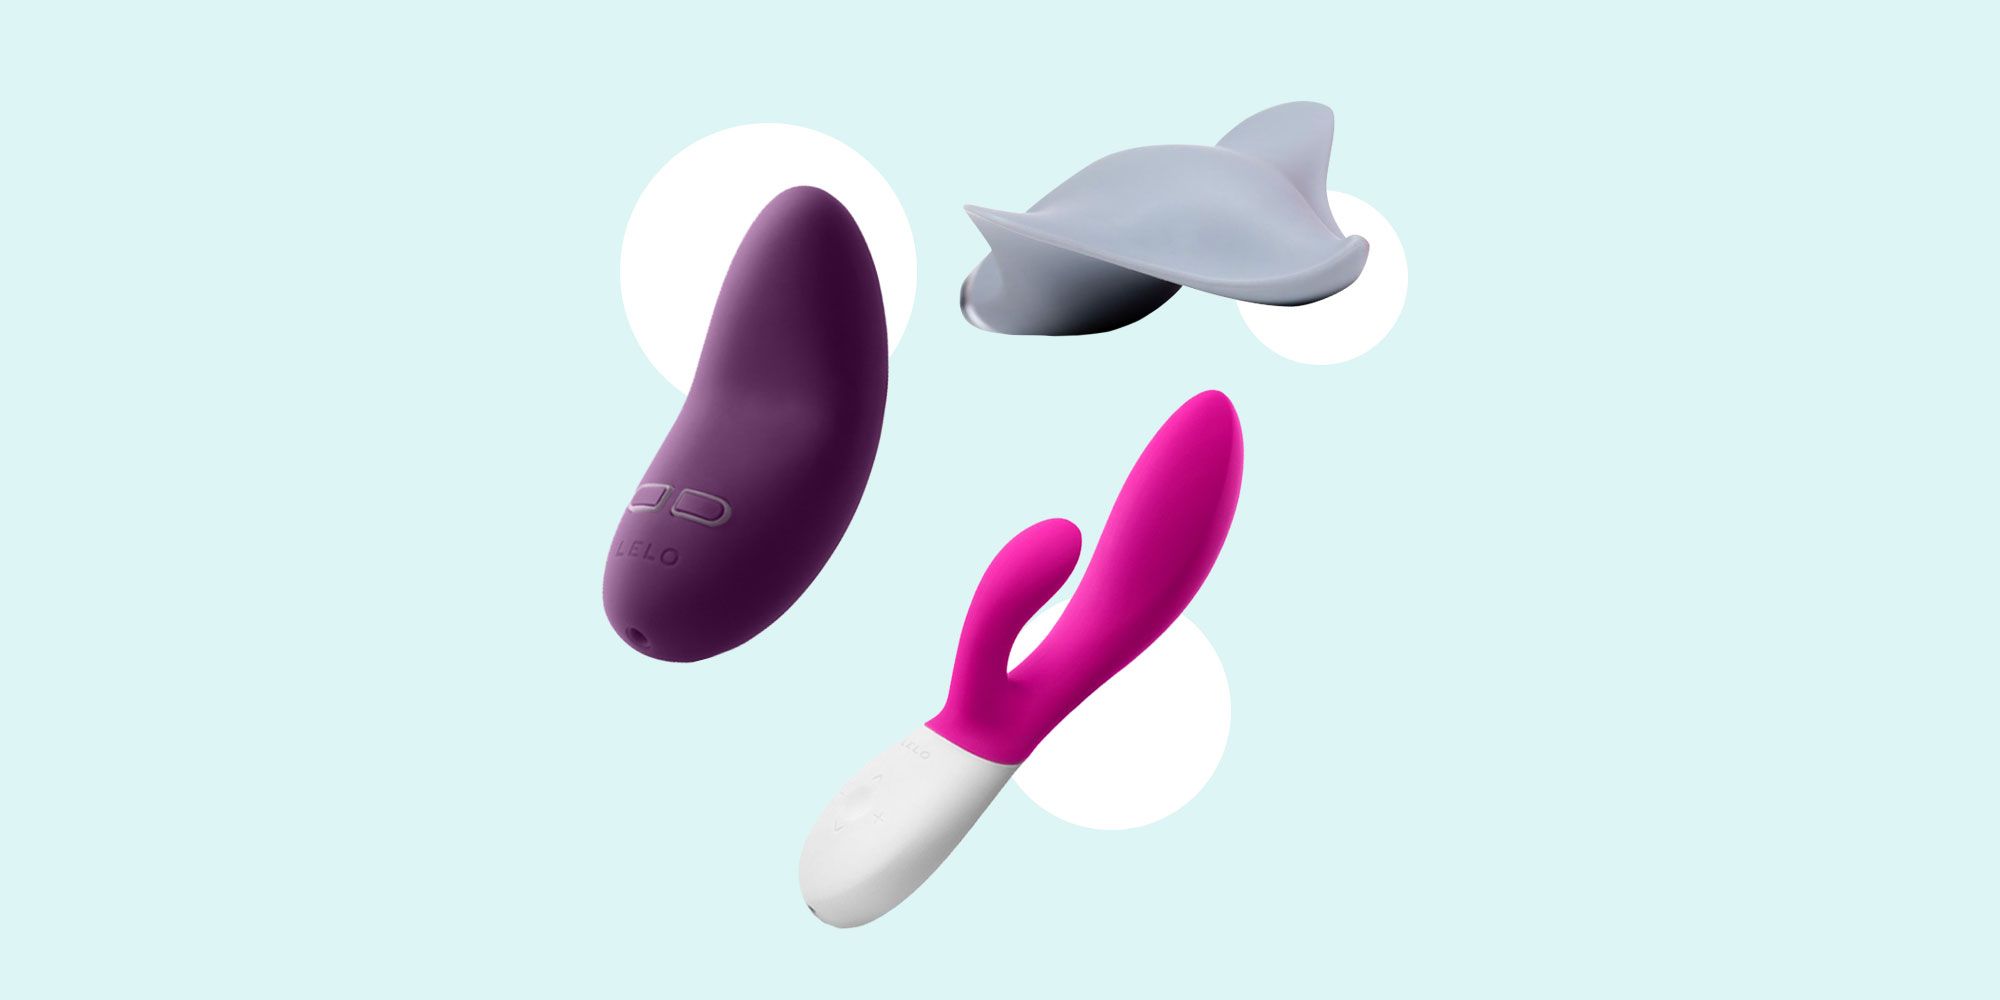 Is there a dildo I can wear in my vagina all day? - Quora